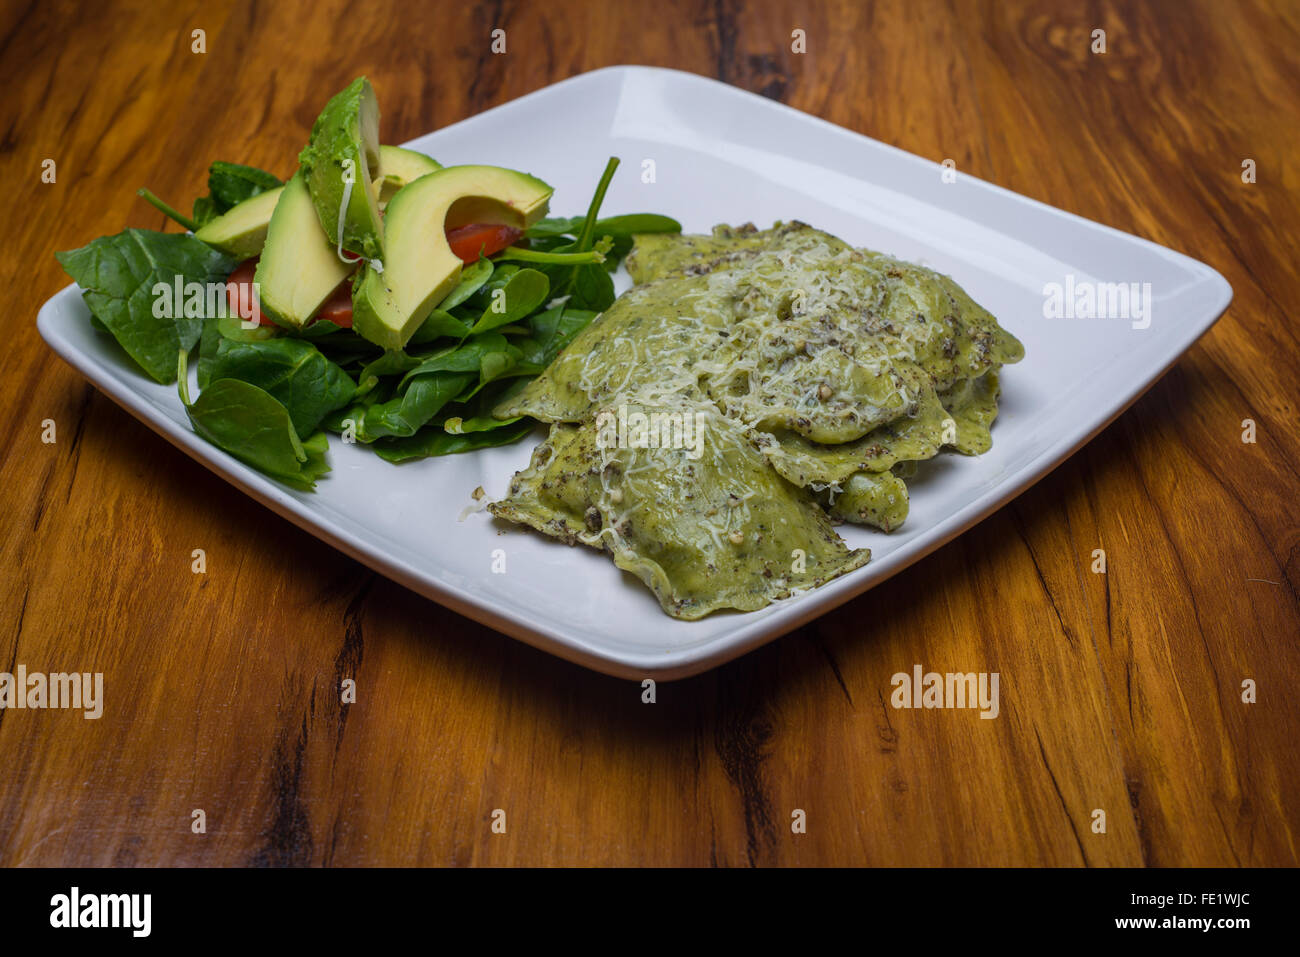 Spinach ravioli with pesto sauce on a plate with an avocado and tomato salad Stock Photo